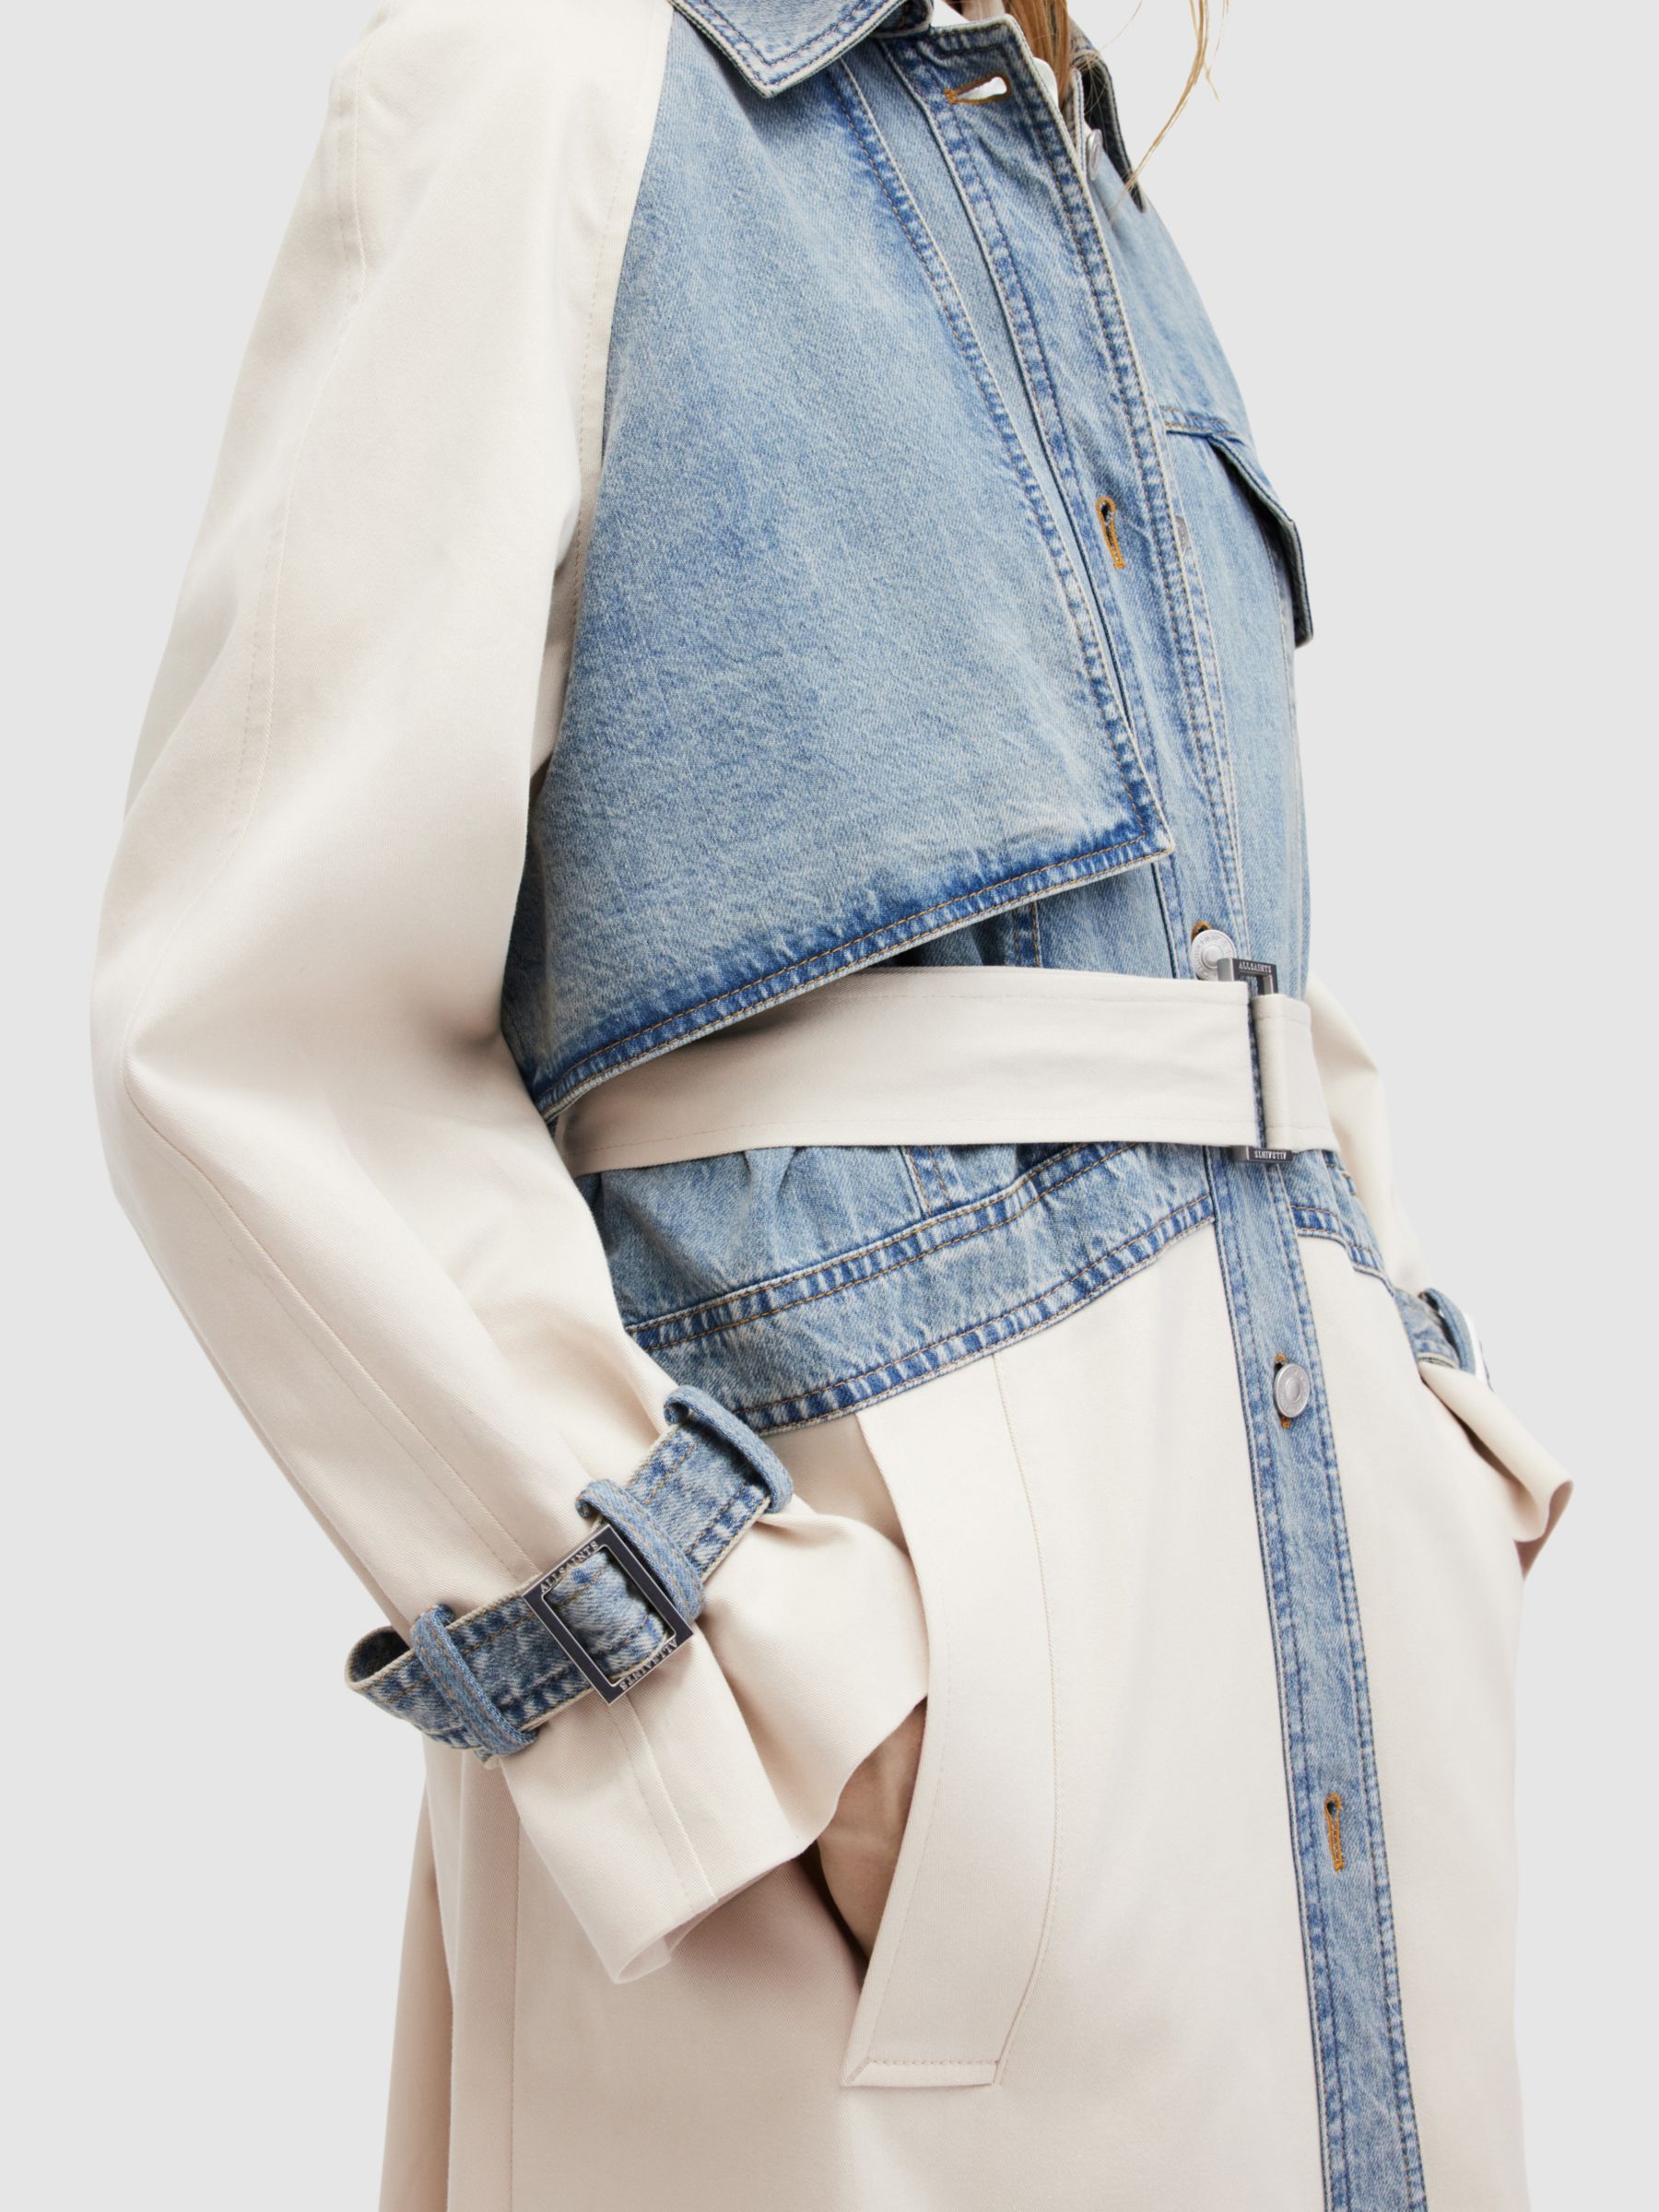 Buy AllSaints Dayly Bi-Material Trench Coat, Stone White/Blue Online at johnlewis.com